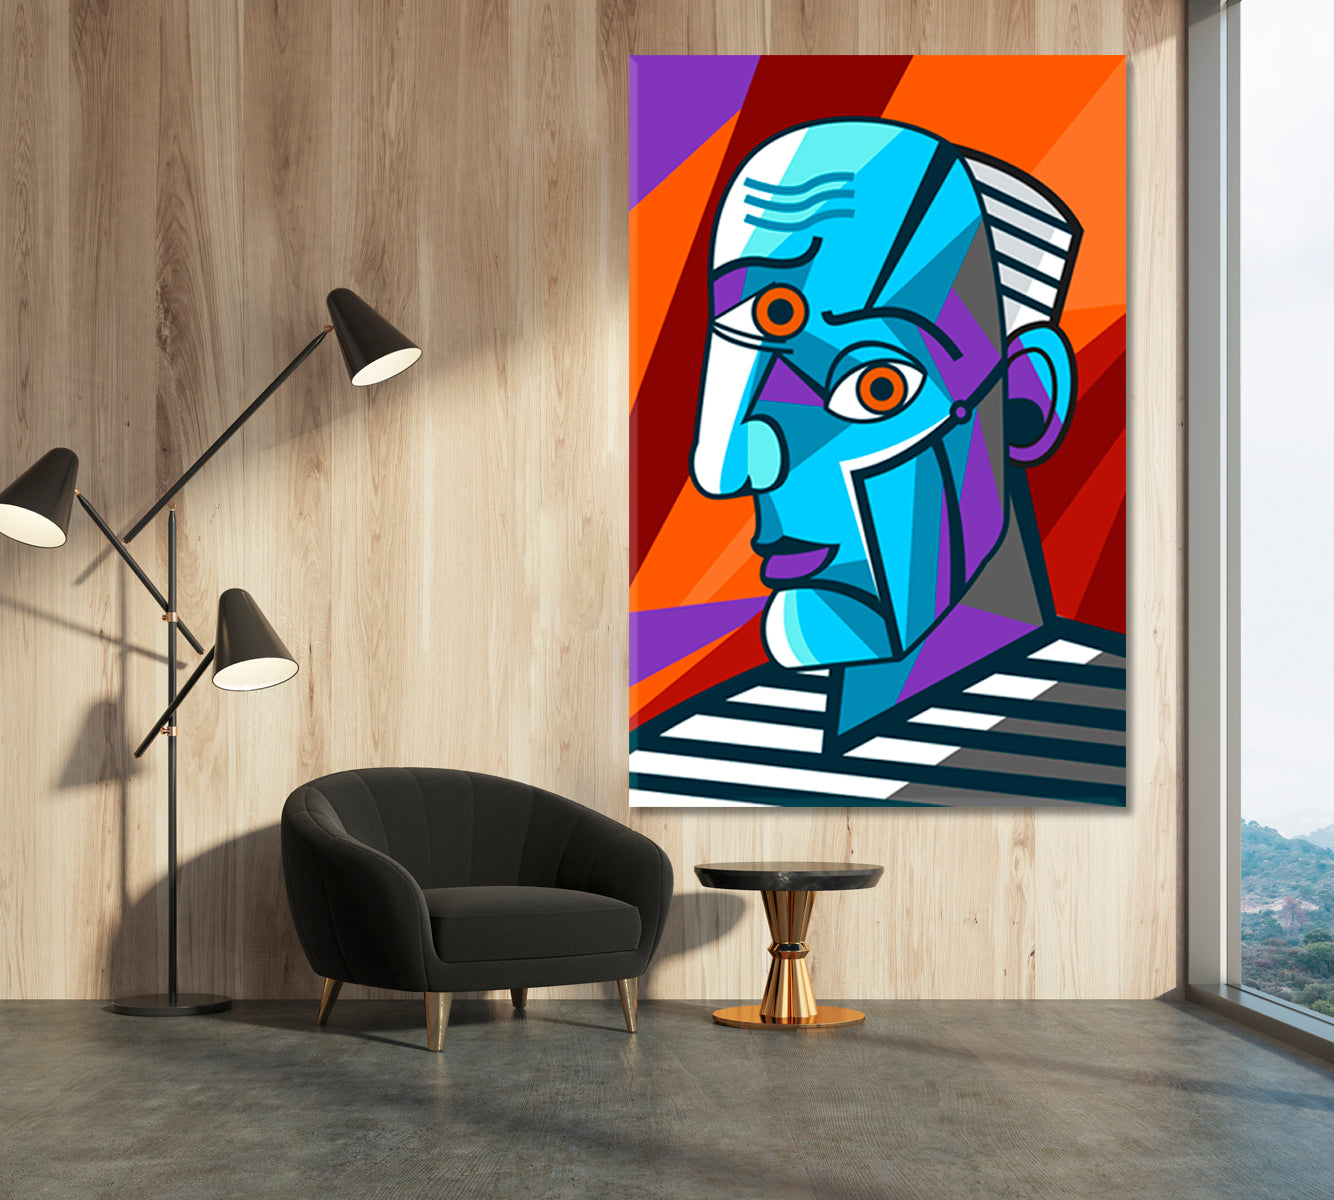 GREAT PAINTER FACE Pablo Picasso Abstract Cubism Dadaism - V Cubist Trendy Large Art Print Artesty   